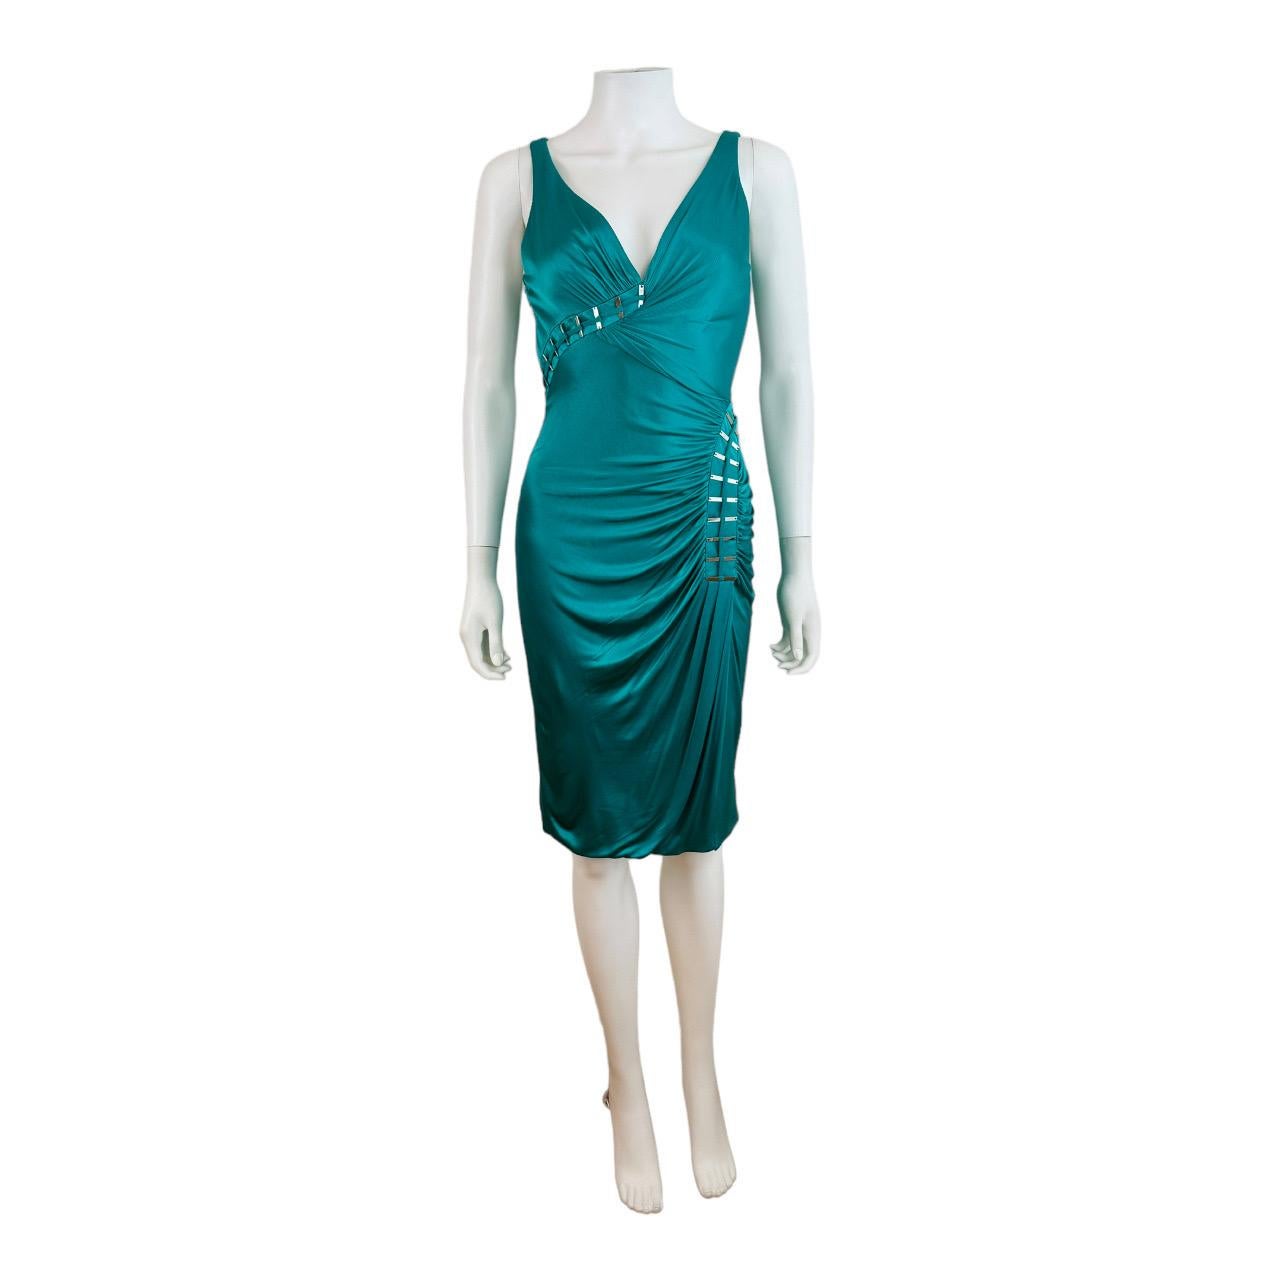 Vintage F/W 2009 Versace Dress Emerald Green Silver Metal Logo Embelishments In Good Condition For Sale In Denver, CO